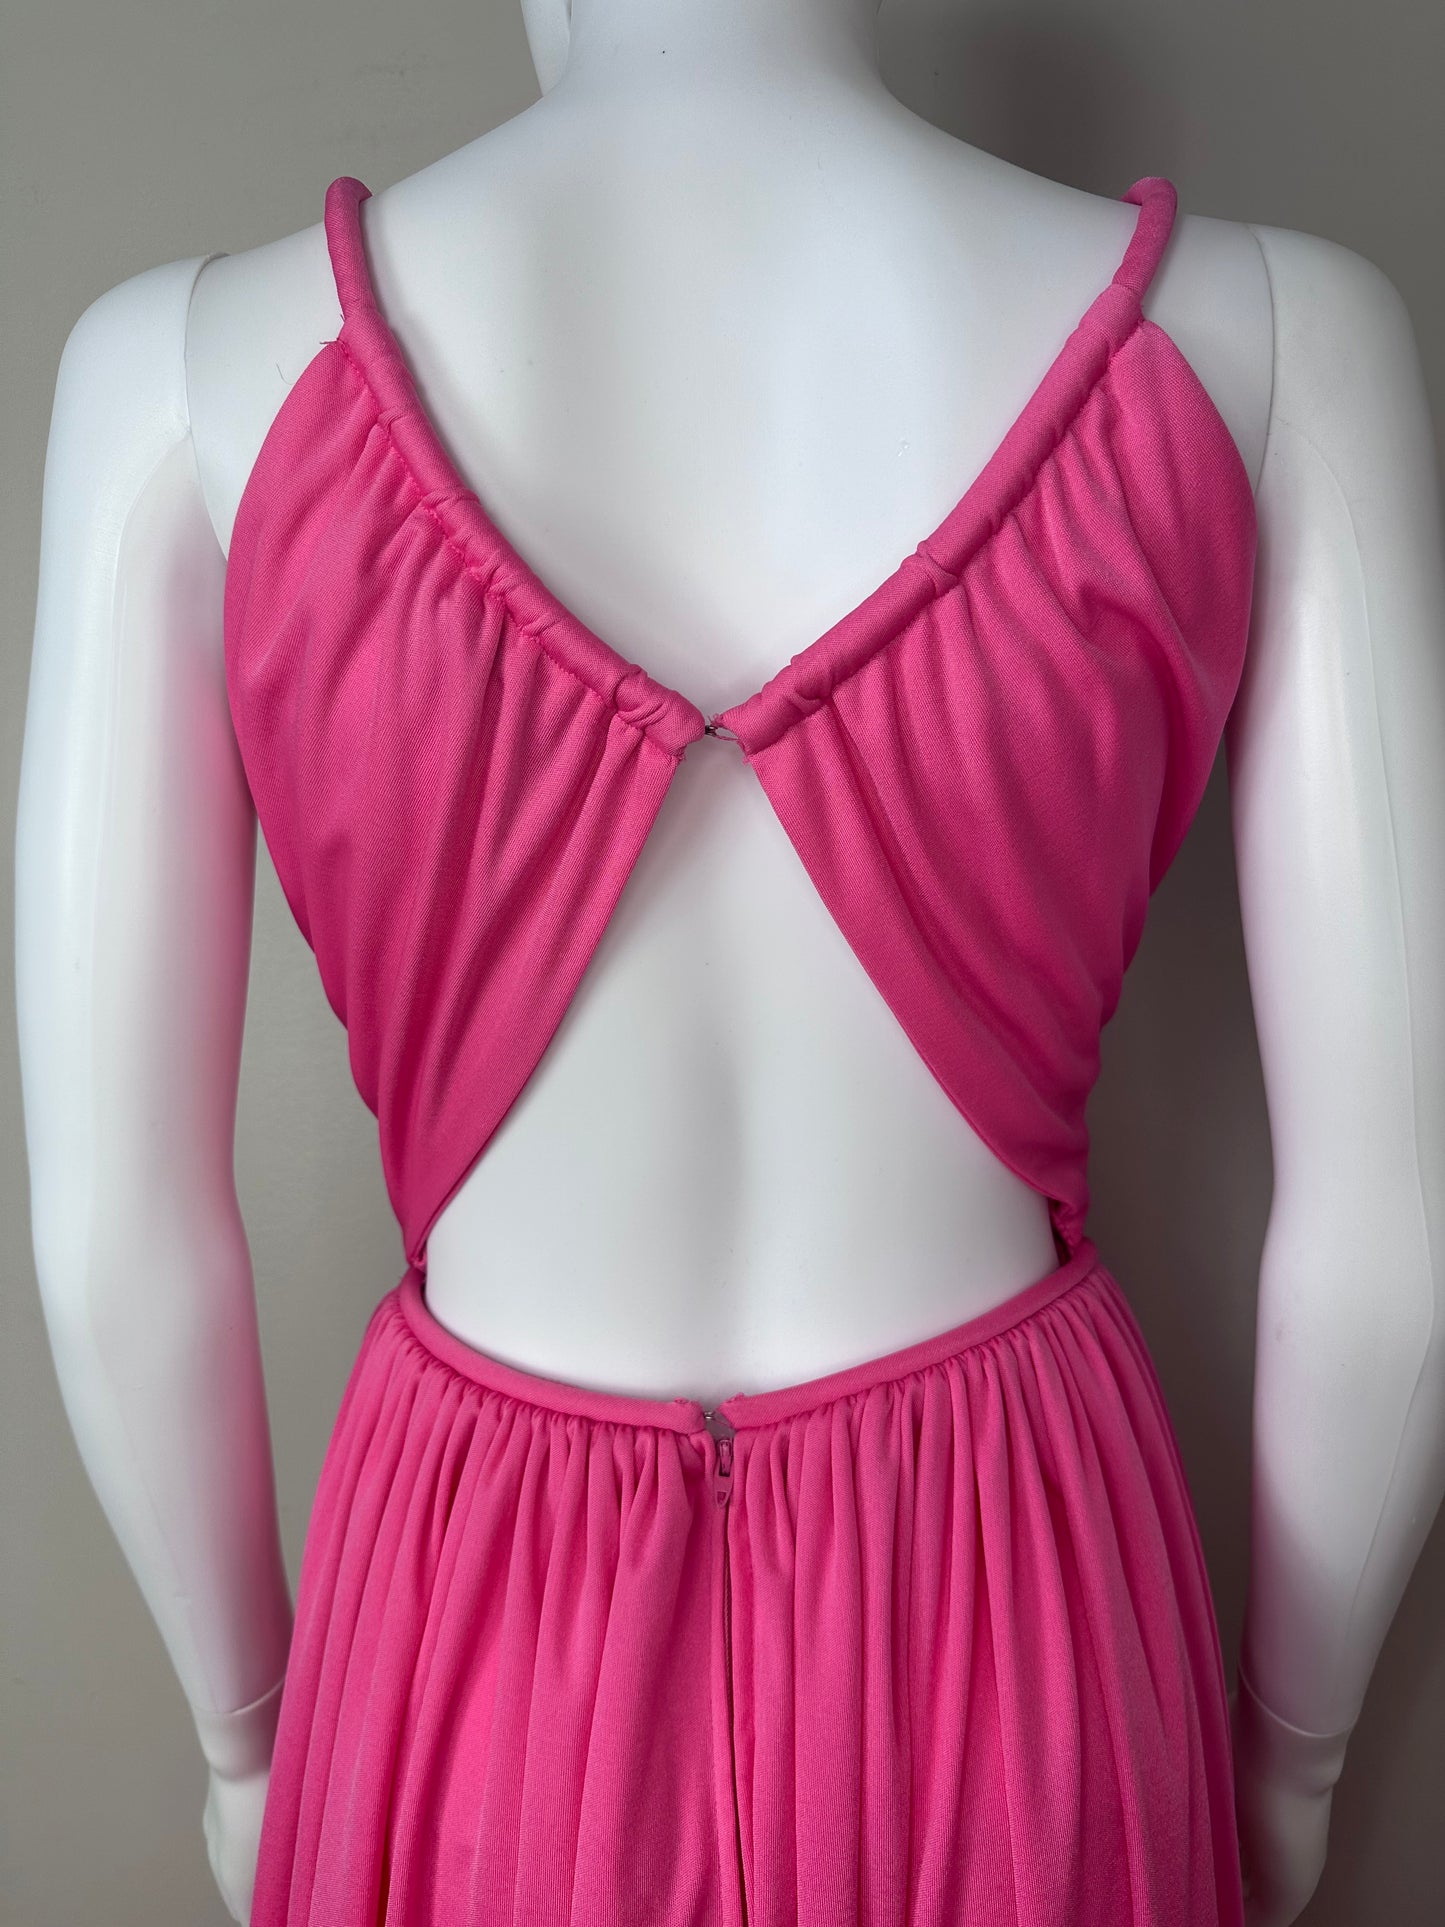 1970s Bright Pink Maxi Dress with Open Back, Ole Borden for Rembrandt International, Size XXS/XS